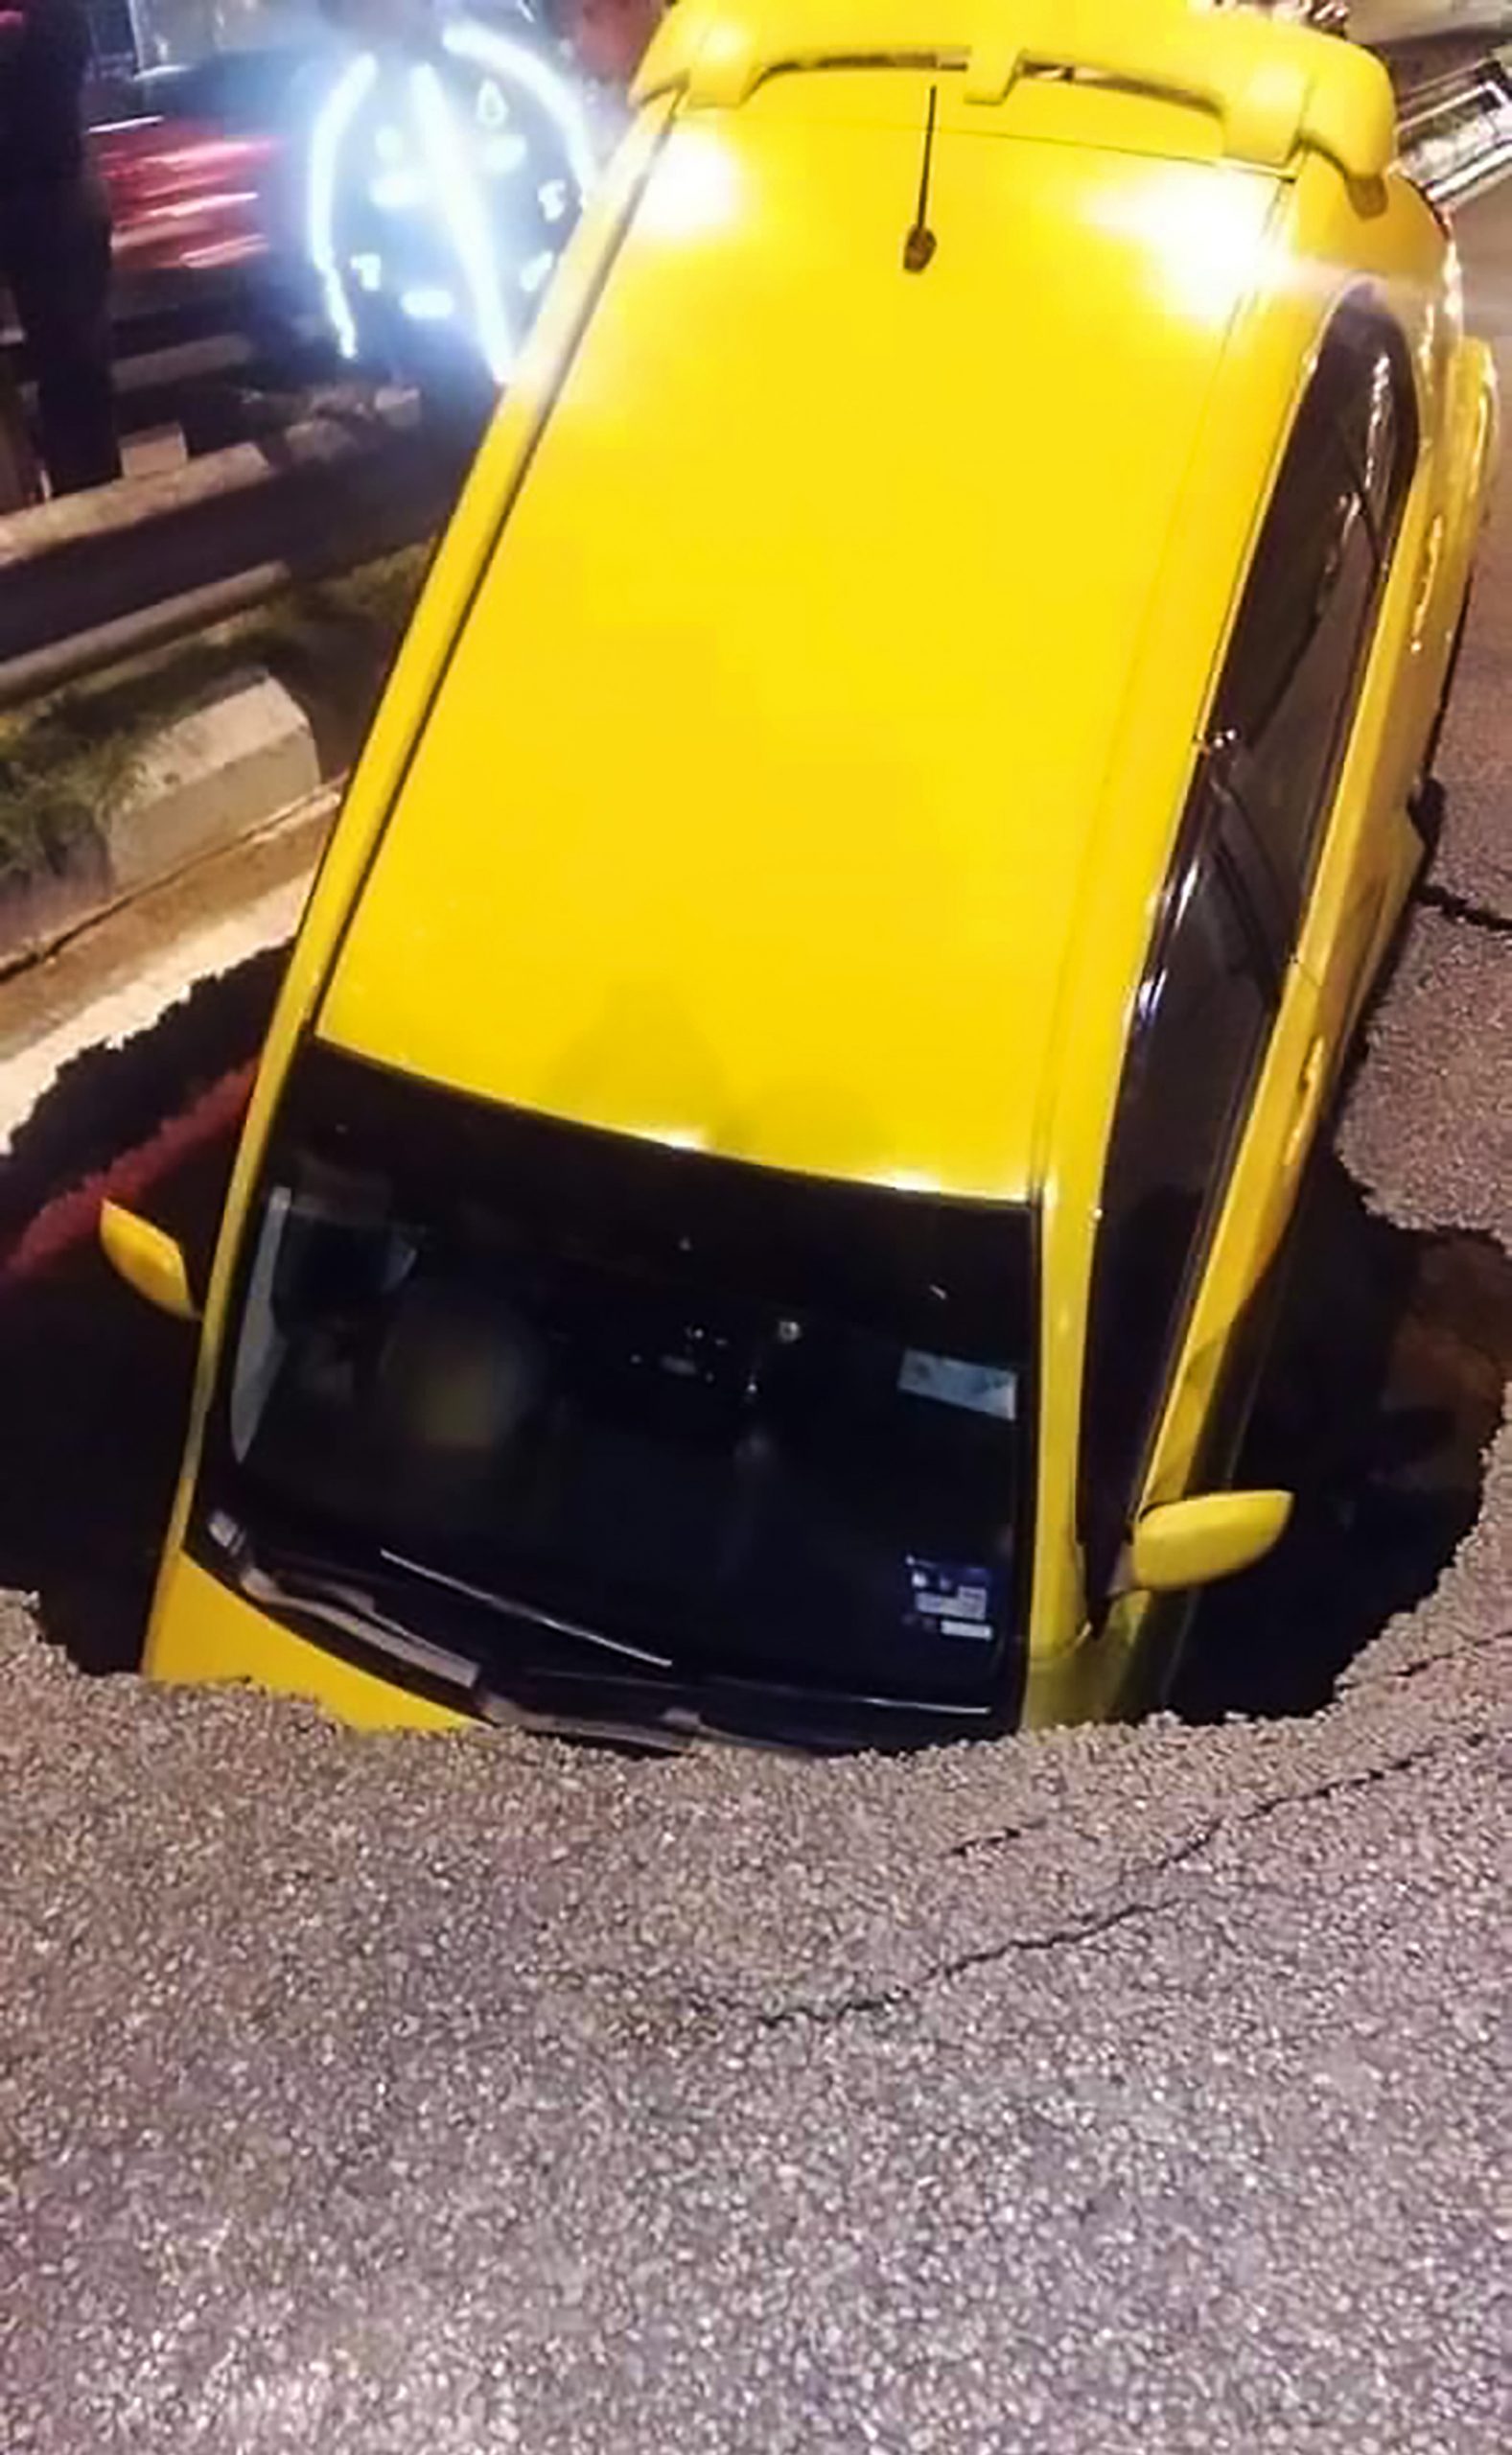 Read more about the article Huge Sinkhole Swallows Kuala Lumpur Car On Street